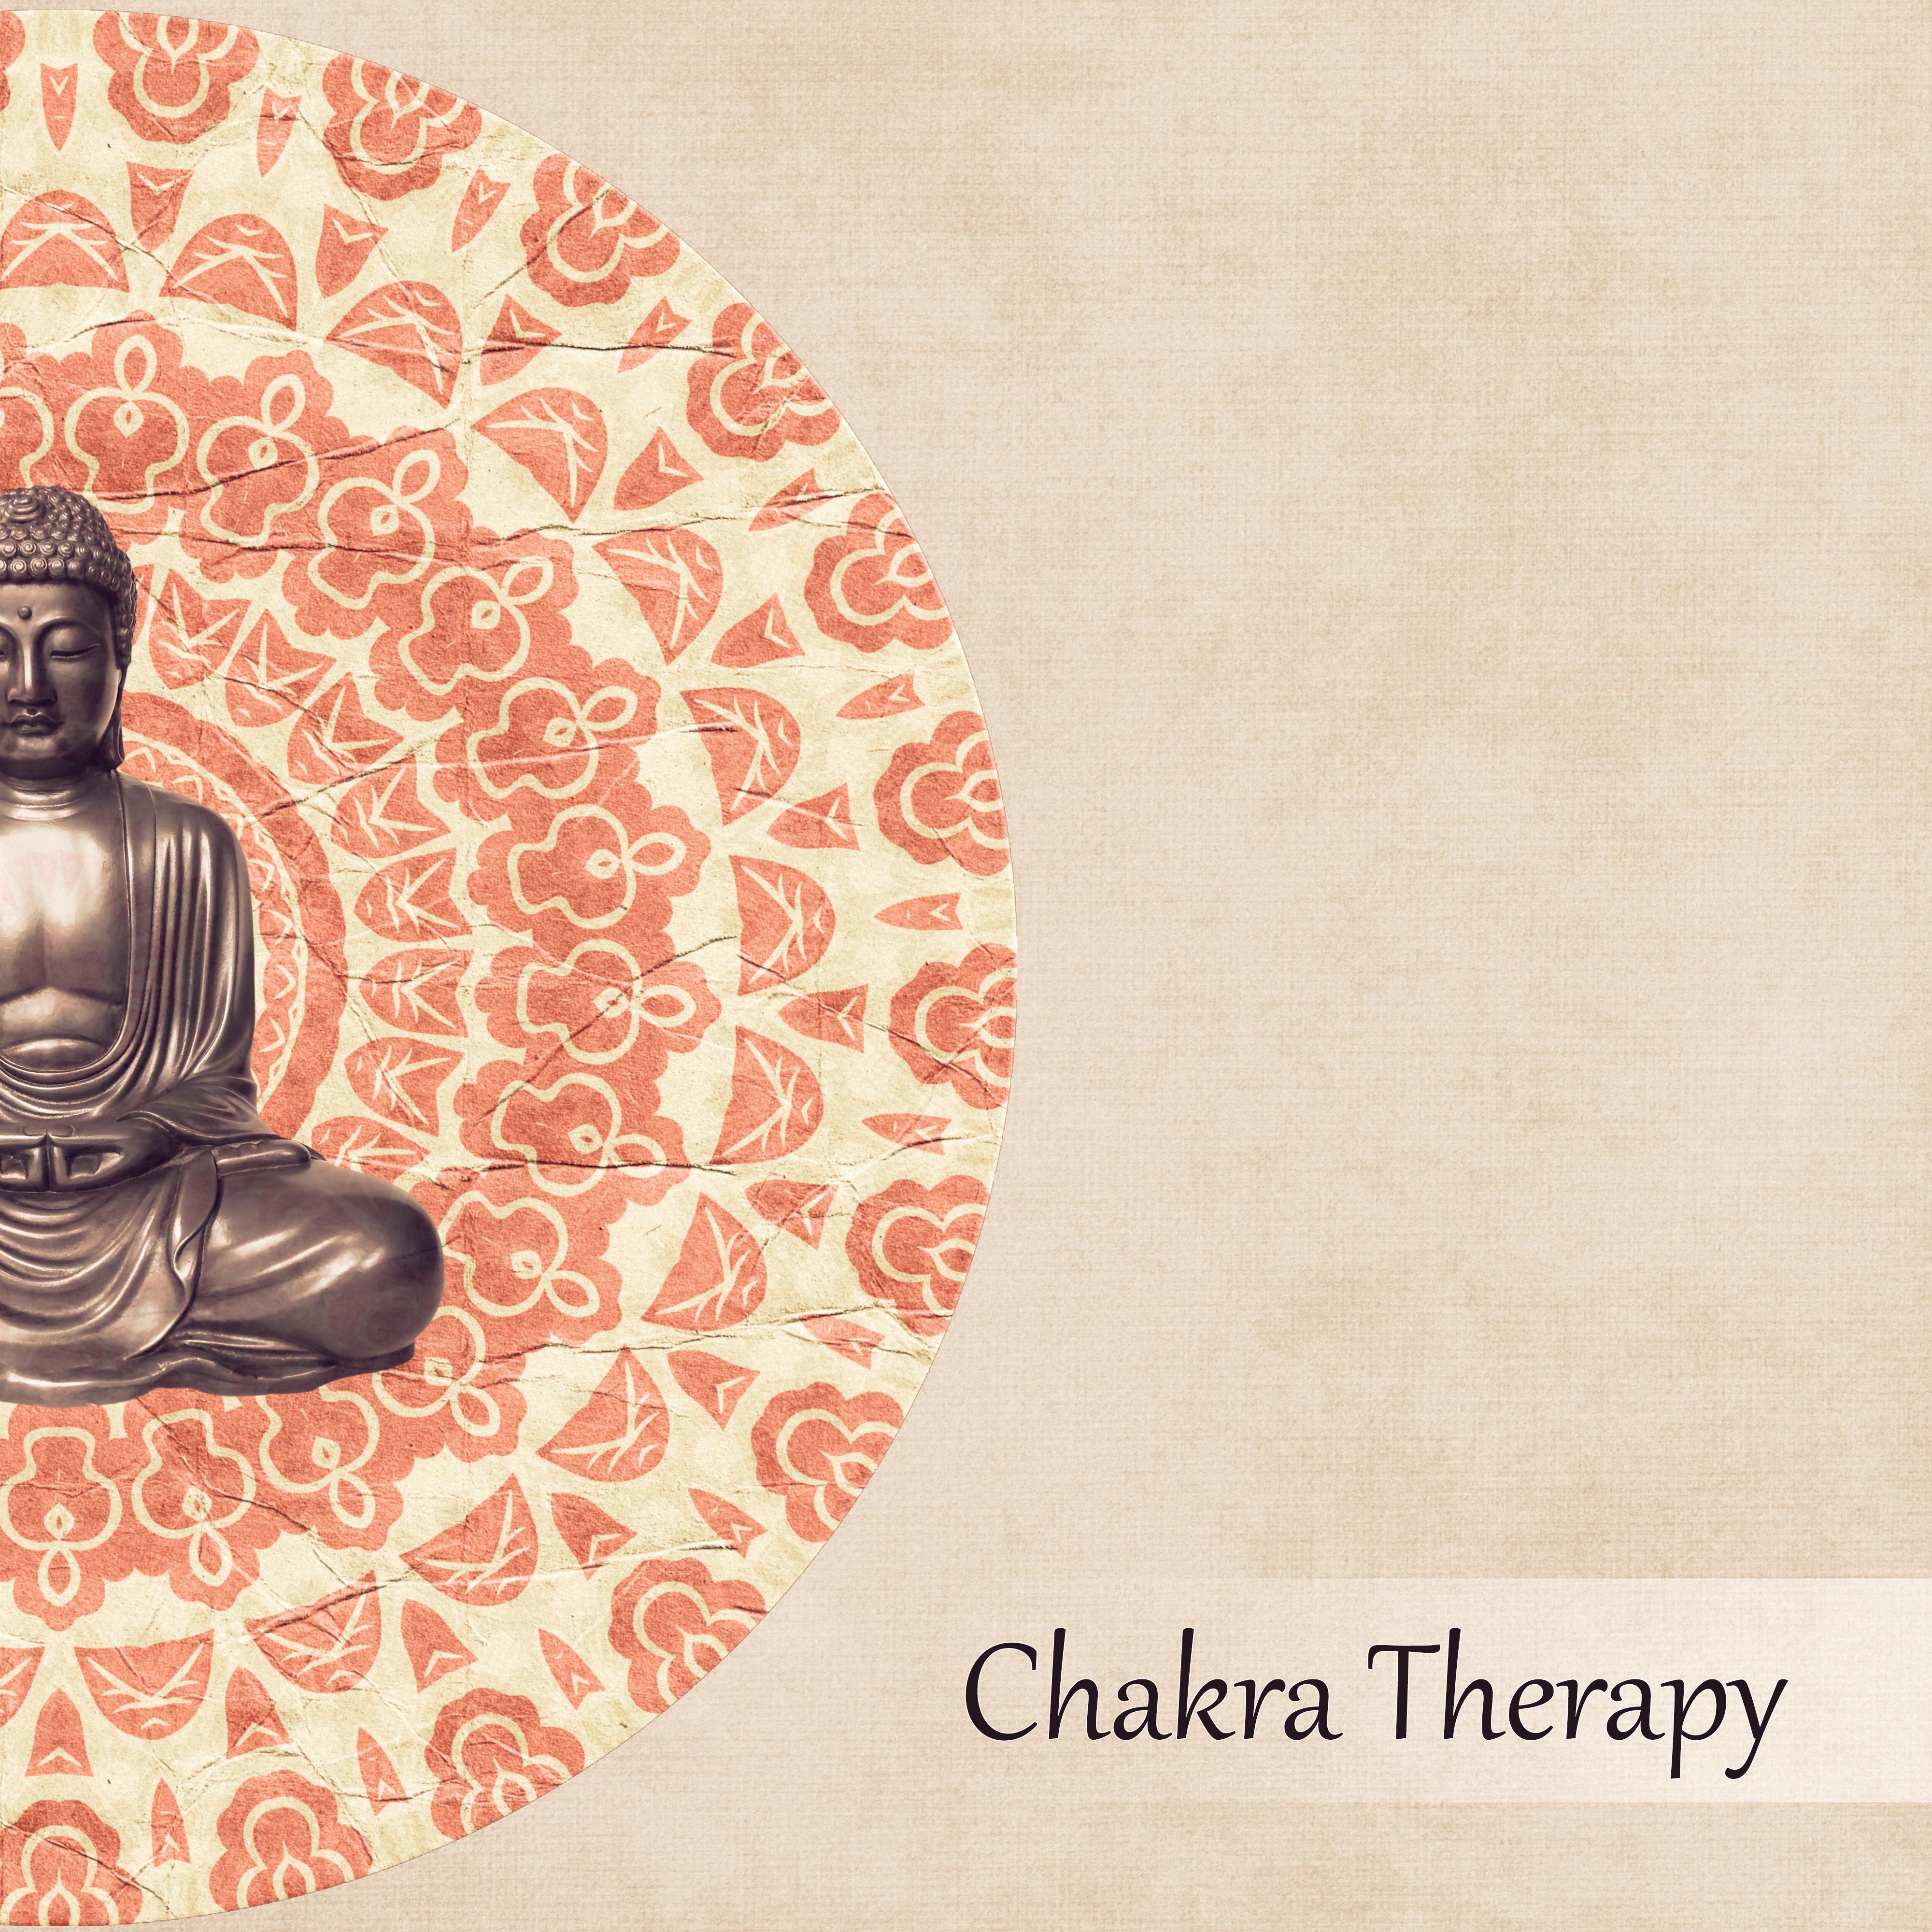 Chakra Therapy - Reiki Healing, Sound Healing, Meditation Relaxation, Pure Yoga with Background Music, Nature Sounds, Inner Balance, Restful Sleep, Music Therapy